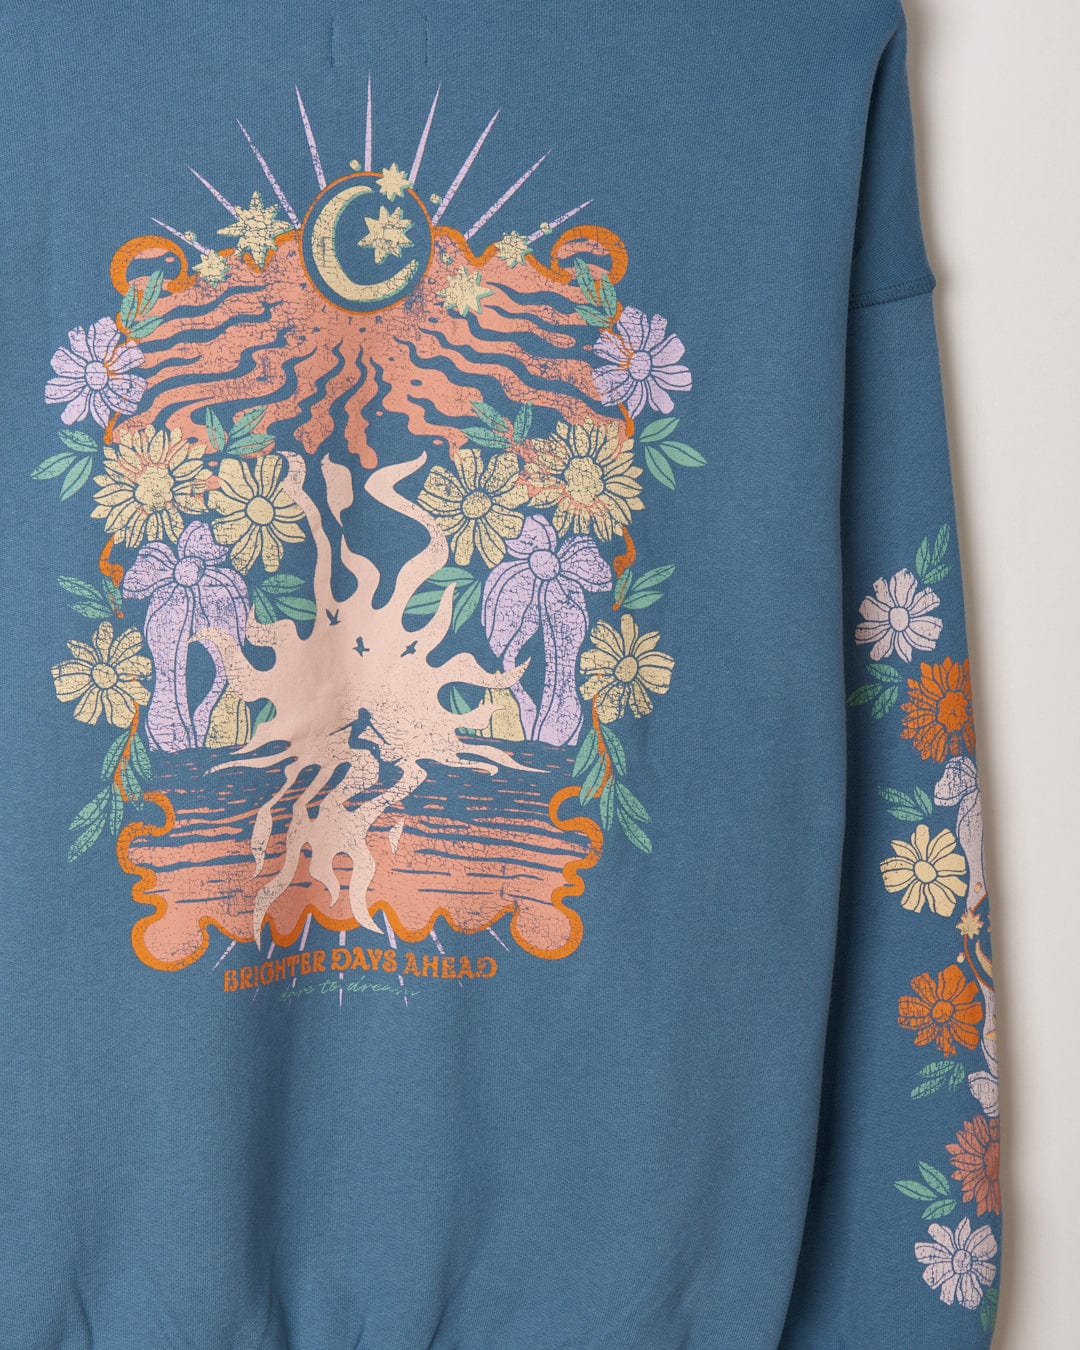 Saltrock Blue Better Days - Womens Pop Hoodie featuring a graphic design with floral elements and the text "Luna - Brighter Days Ahead," including additional flower patterns along the sleeve.